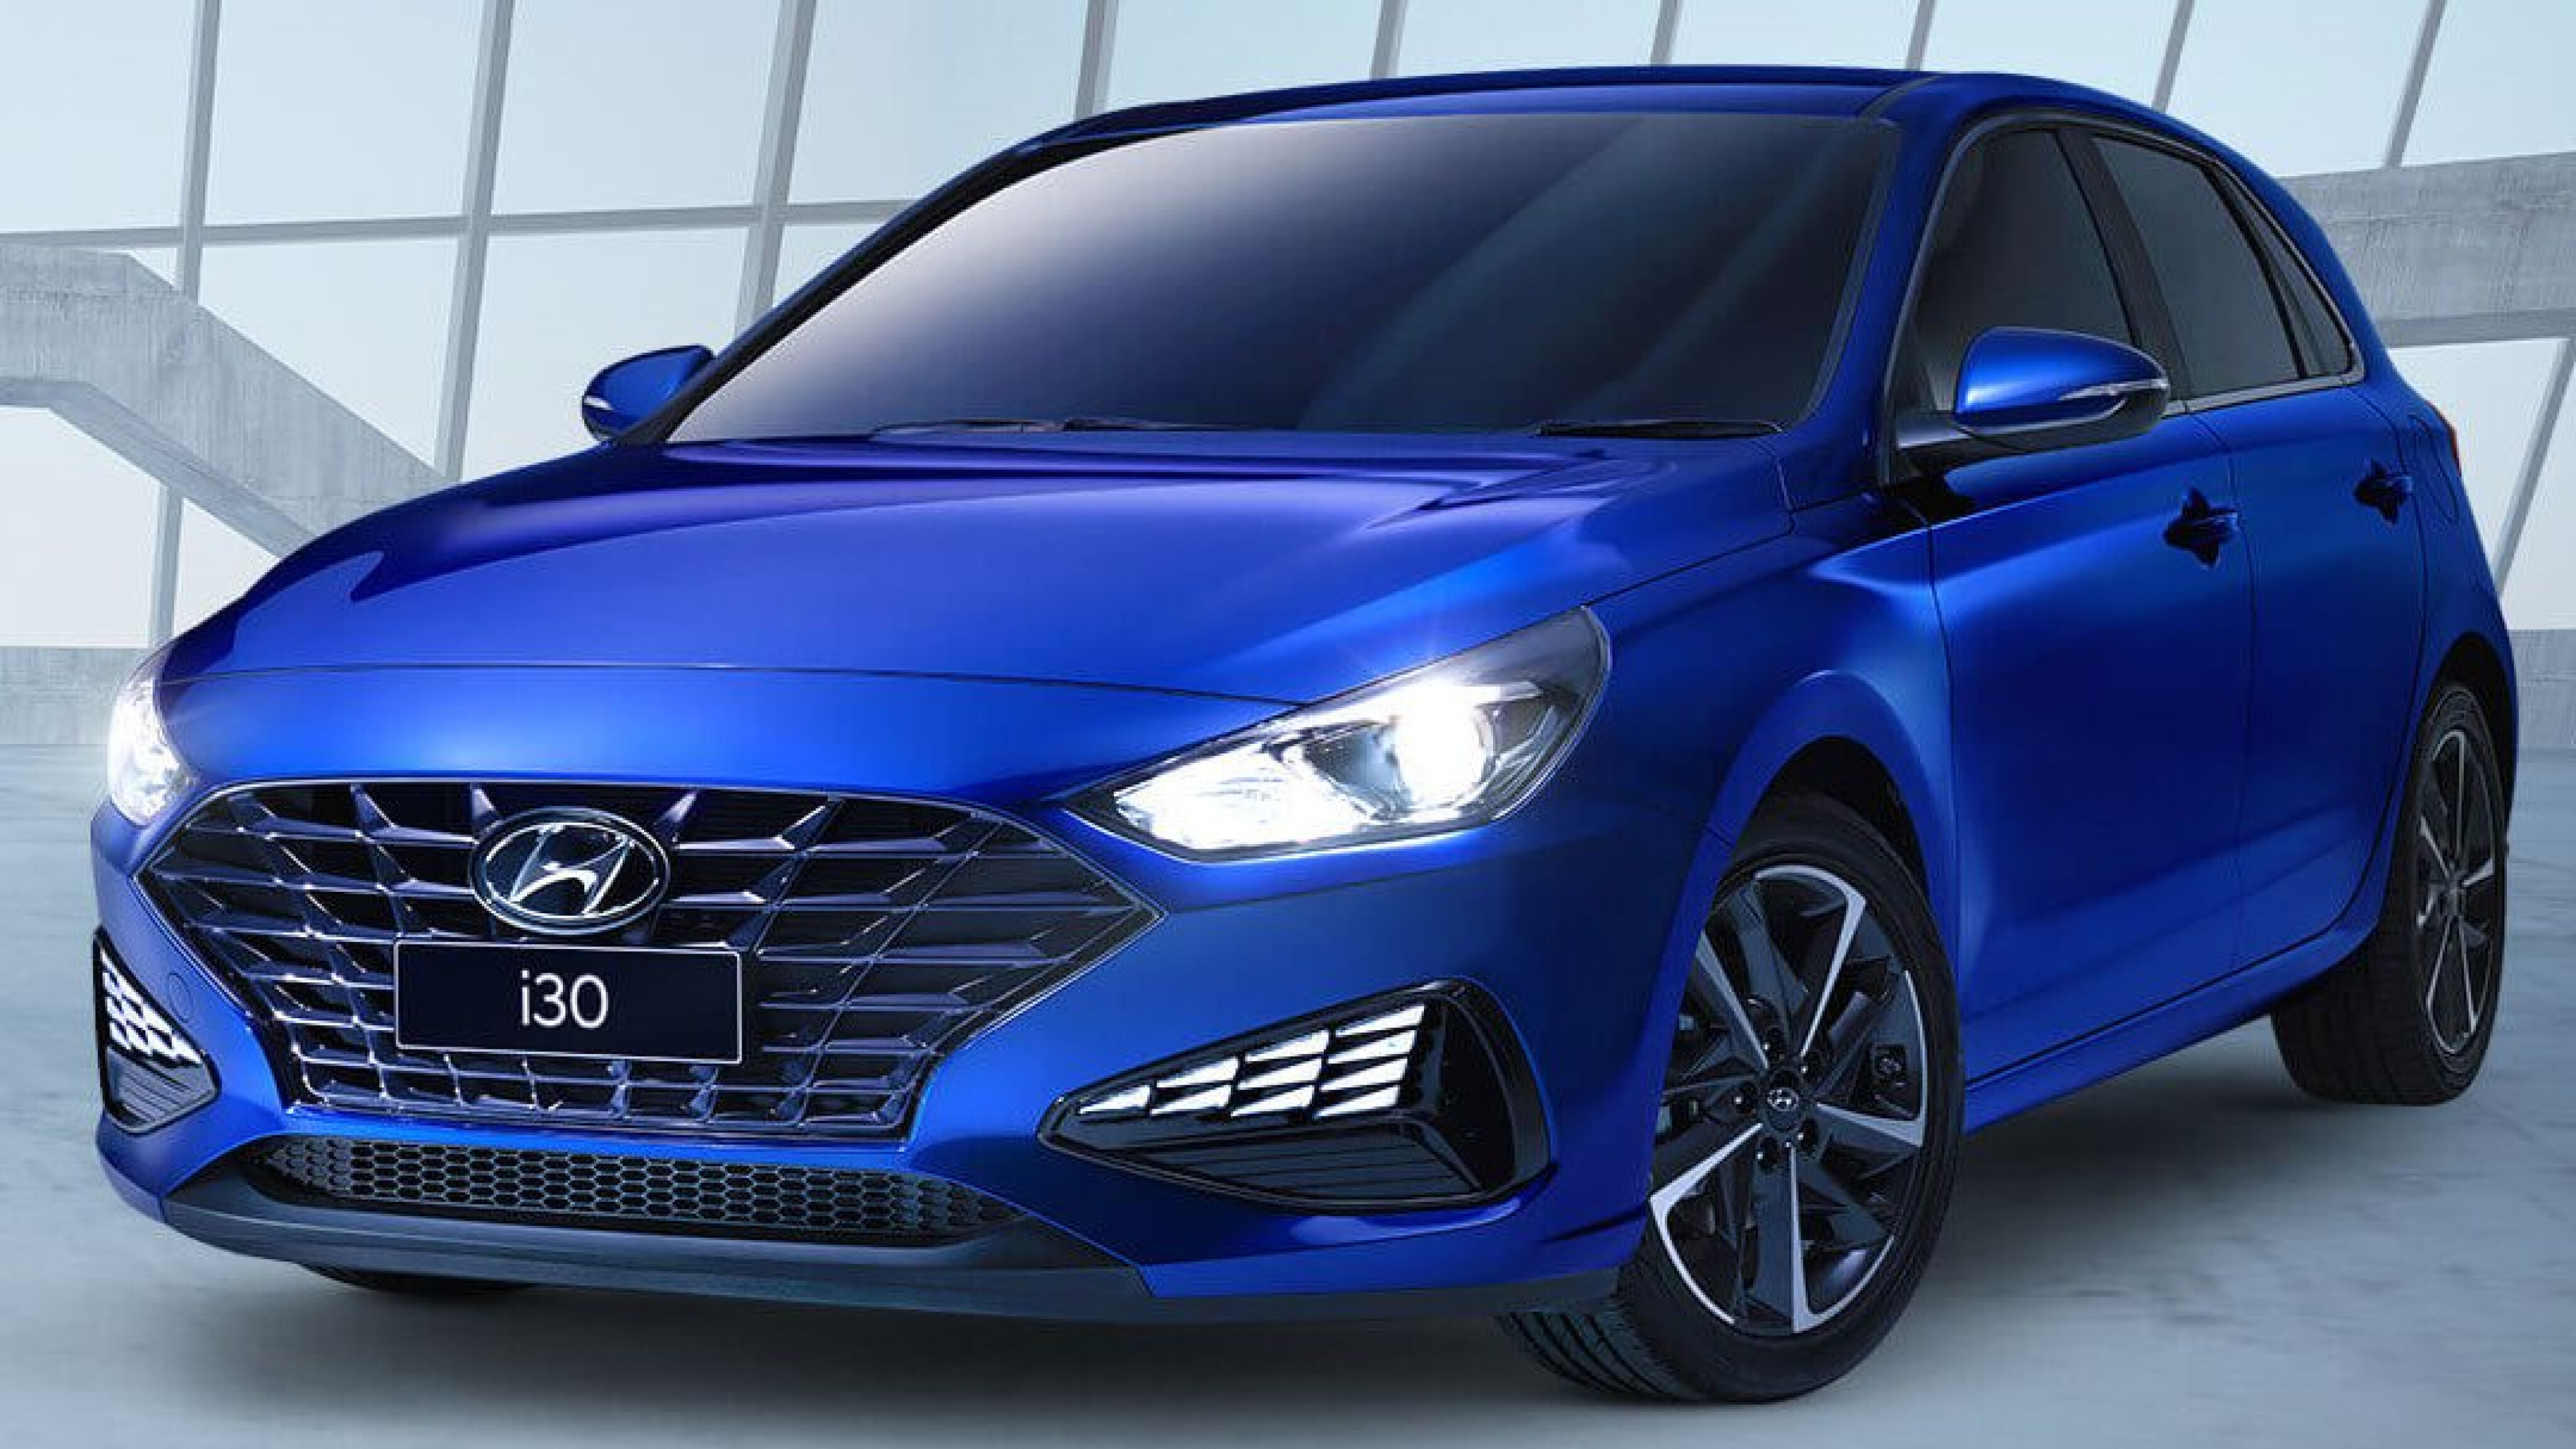 Hyundai reveals new i30 hatchback pricing with specs